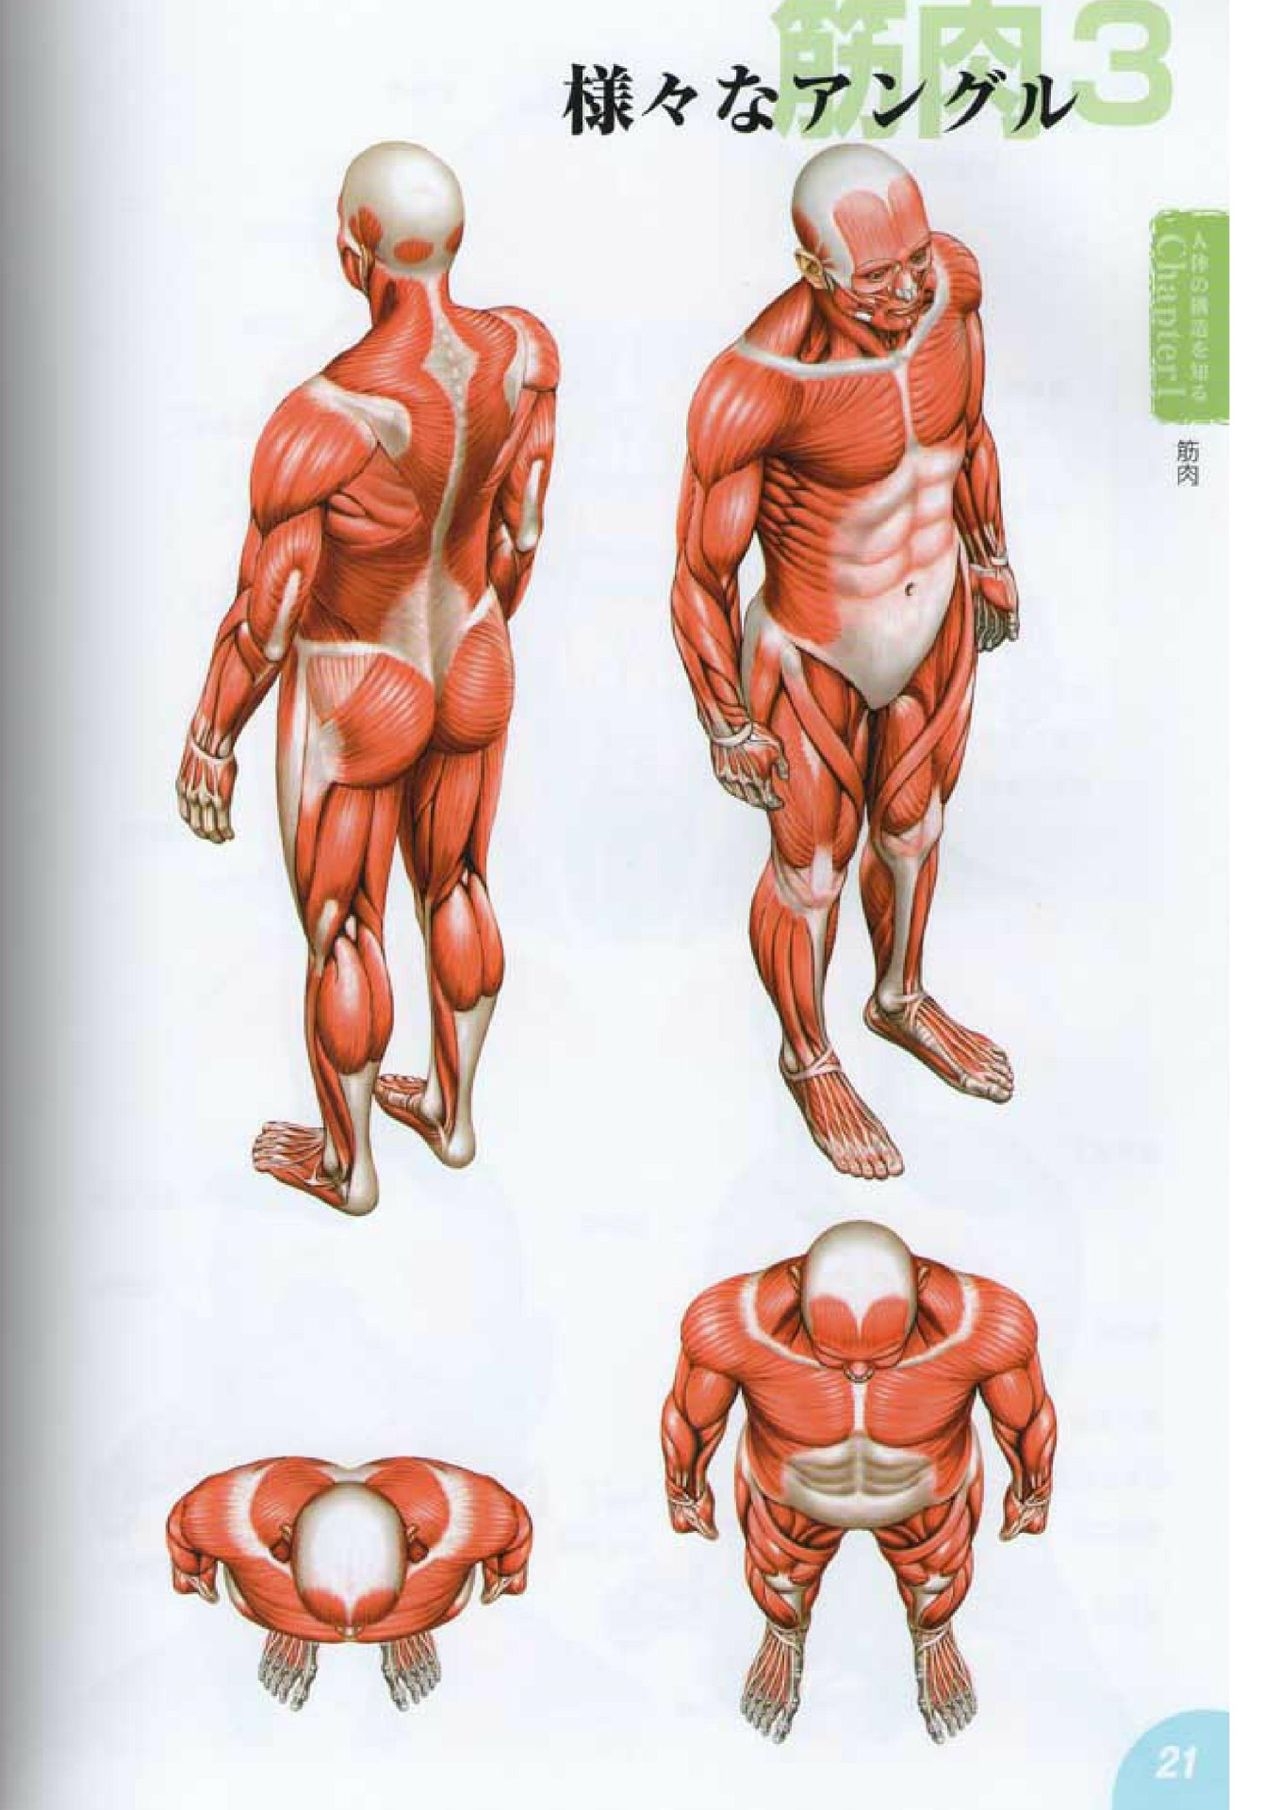 How to draw a character drawing from a human anatomical chart 20